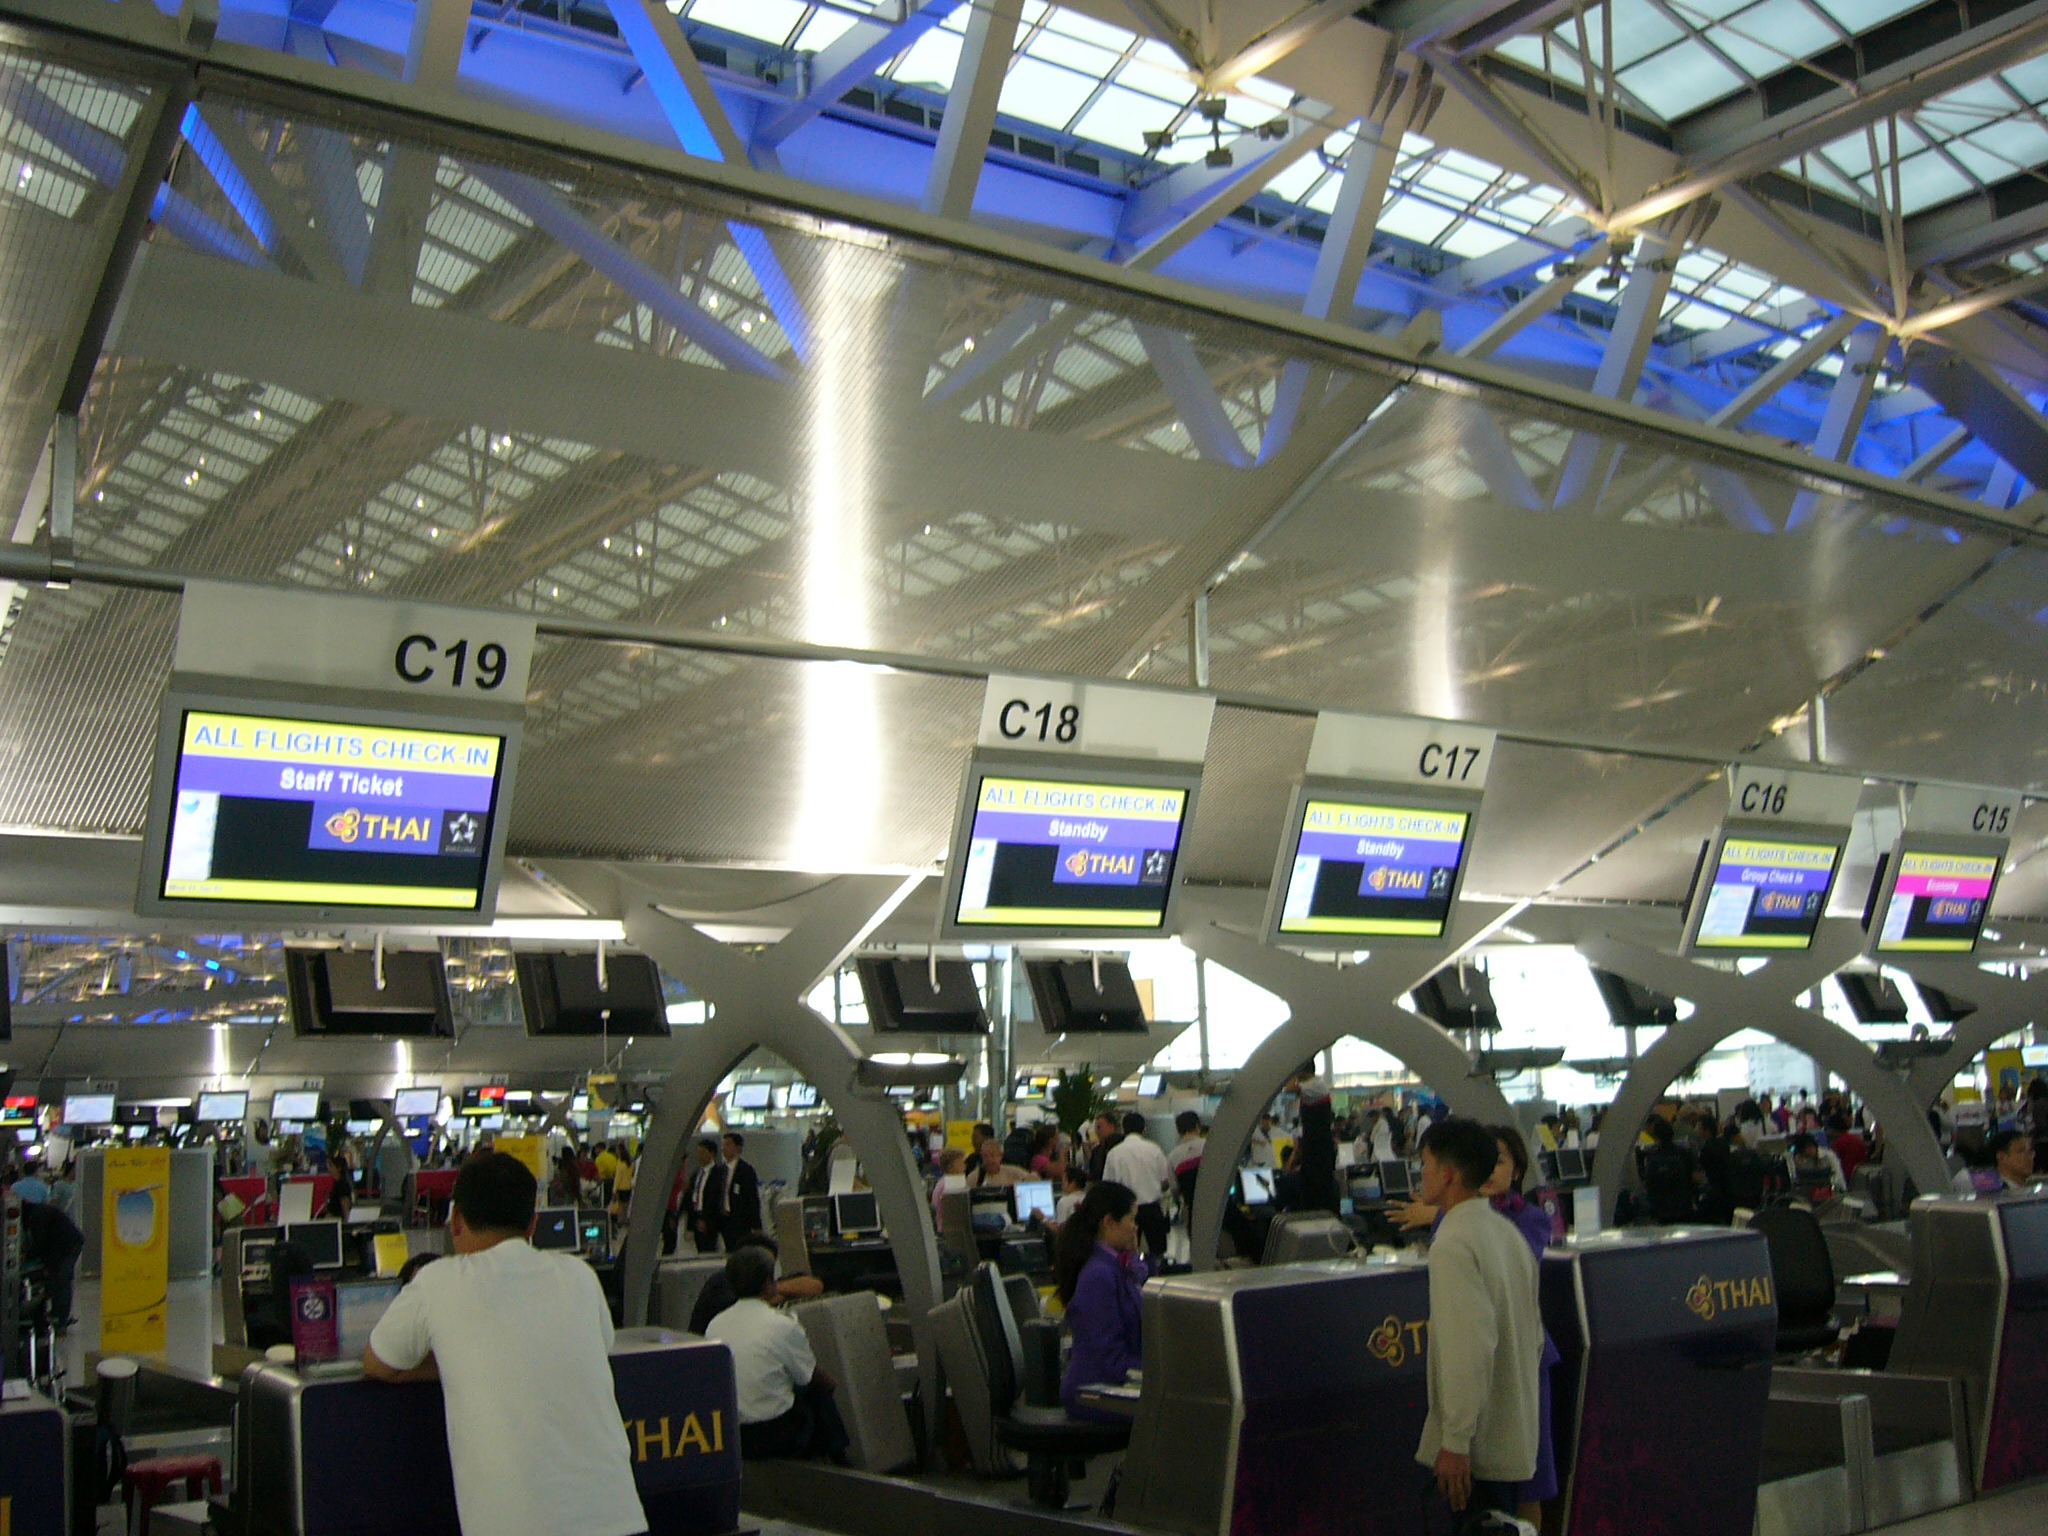 VTBS-Thai Airways Check-in counters